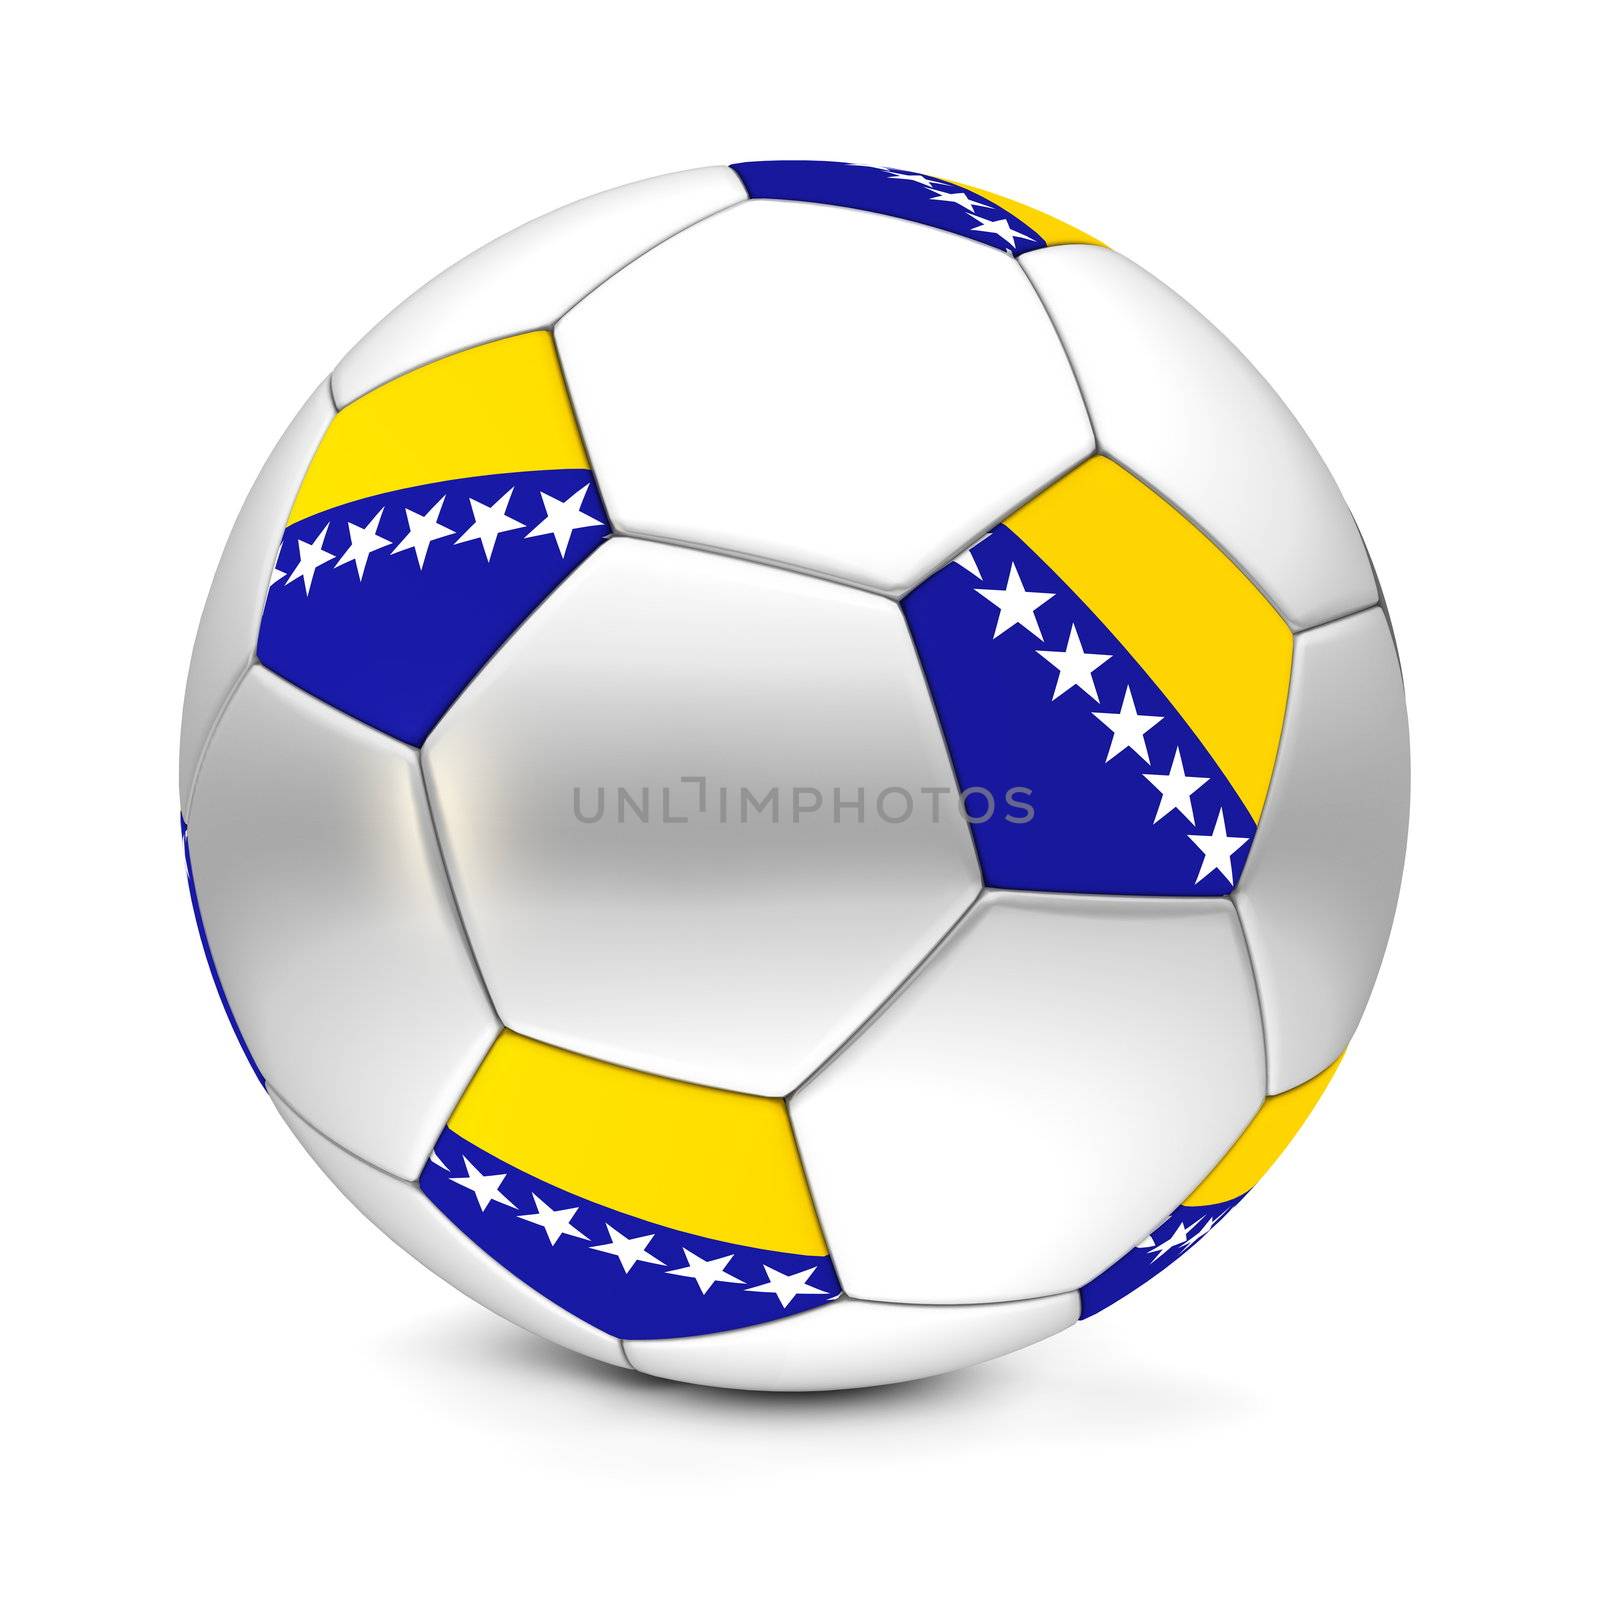 shiny football/soccer ball with the flag of Bosnia And Herzegovina on the pentagons